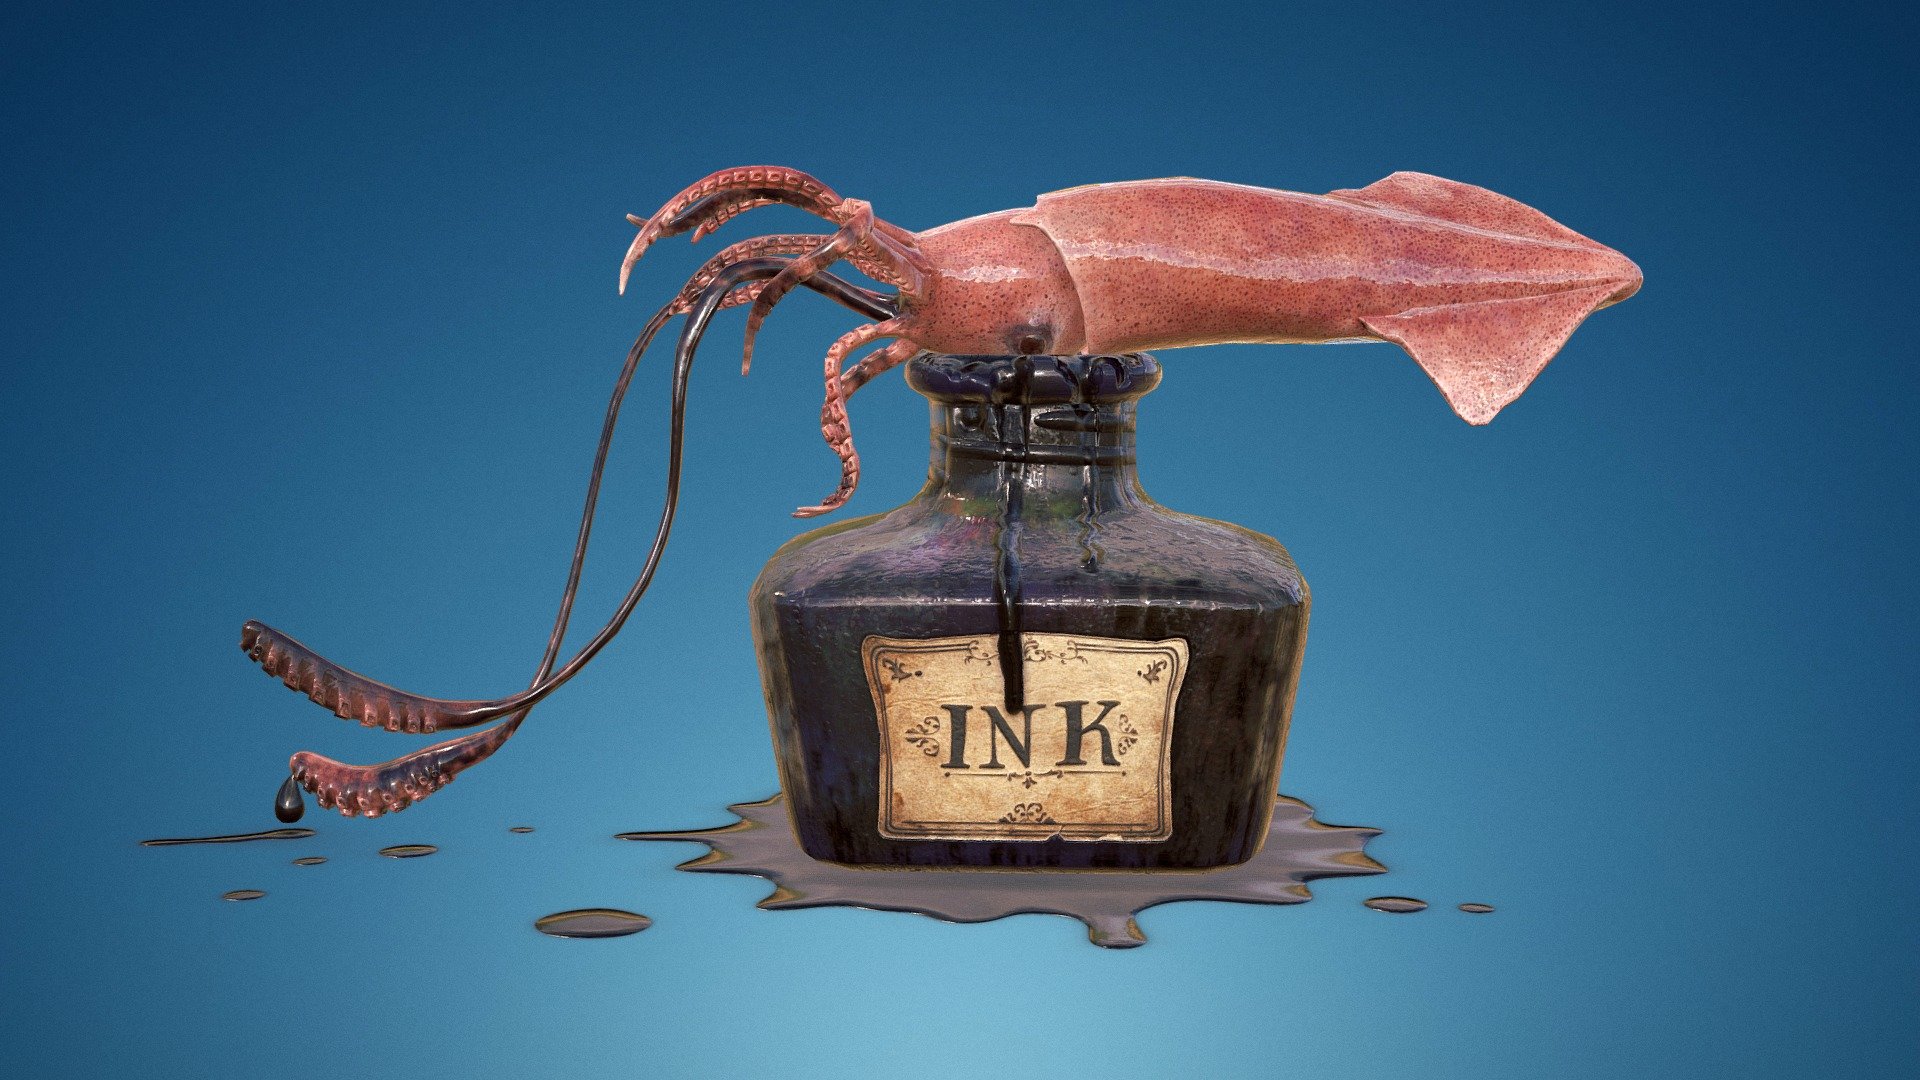 6.9k Quads + 251 Tris
14k converted to Tris

4K maps, so please wait until they load completely!  :)

sketchfab.com/blogs/community/art-spotlight-squid-ink-bottle/

Personal project made just for fun! Modeling made in 3ds max Texturing and baking made in Substance Painter, ink sculpted in zbrush. 

2 Texture Sets/Materials, one for the Squid and another for the bottle, floor and ink drop 3d model